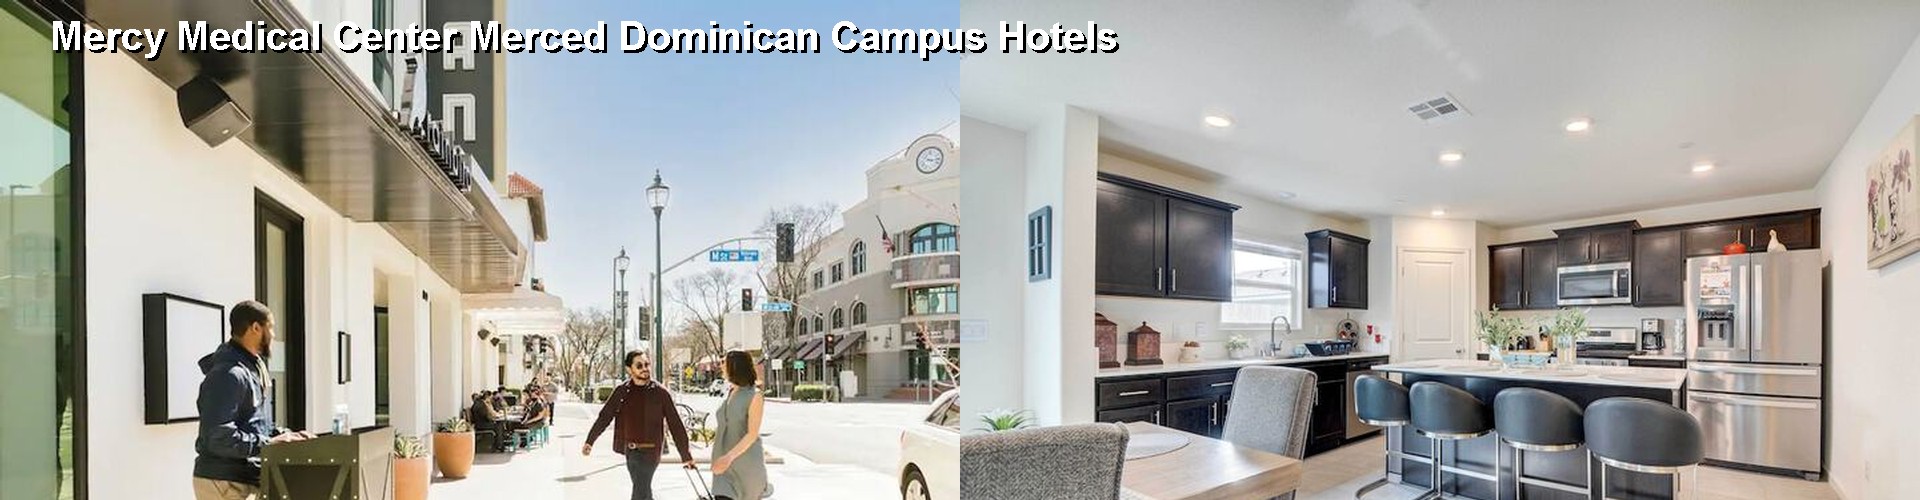 3 Best Hotels near Mercy Medical Center Merced Dominican Campus